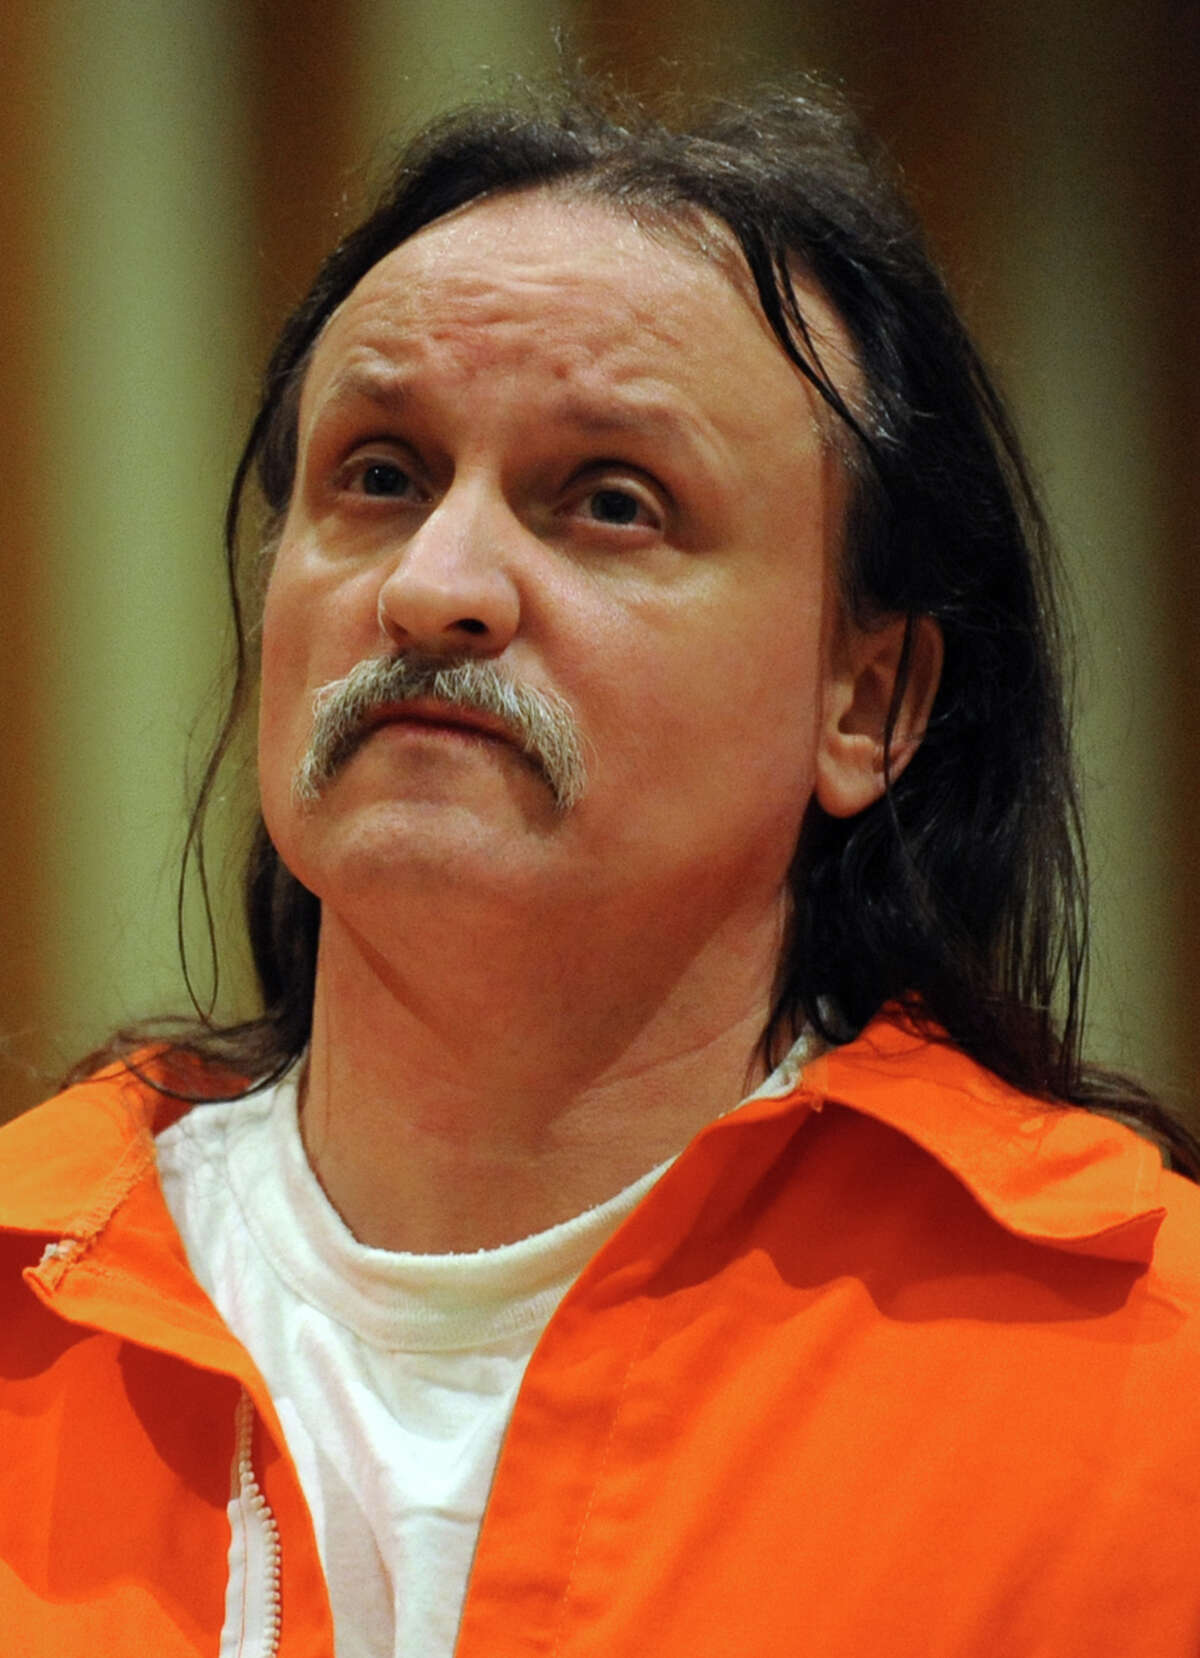 Richard Roszkowski who was convicted for the 2006 murders of his former girlfriend, her 9-year-old daughter and his former roommate during a pre-trial hearing on June 6, 2012.